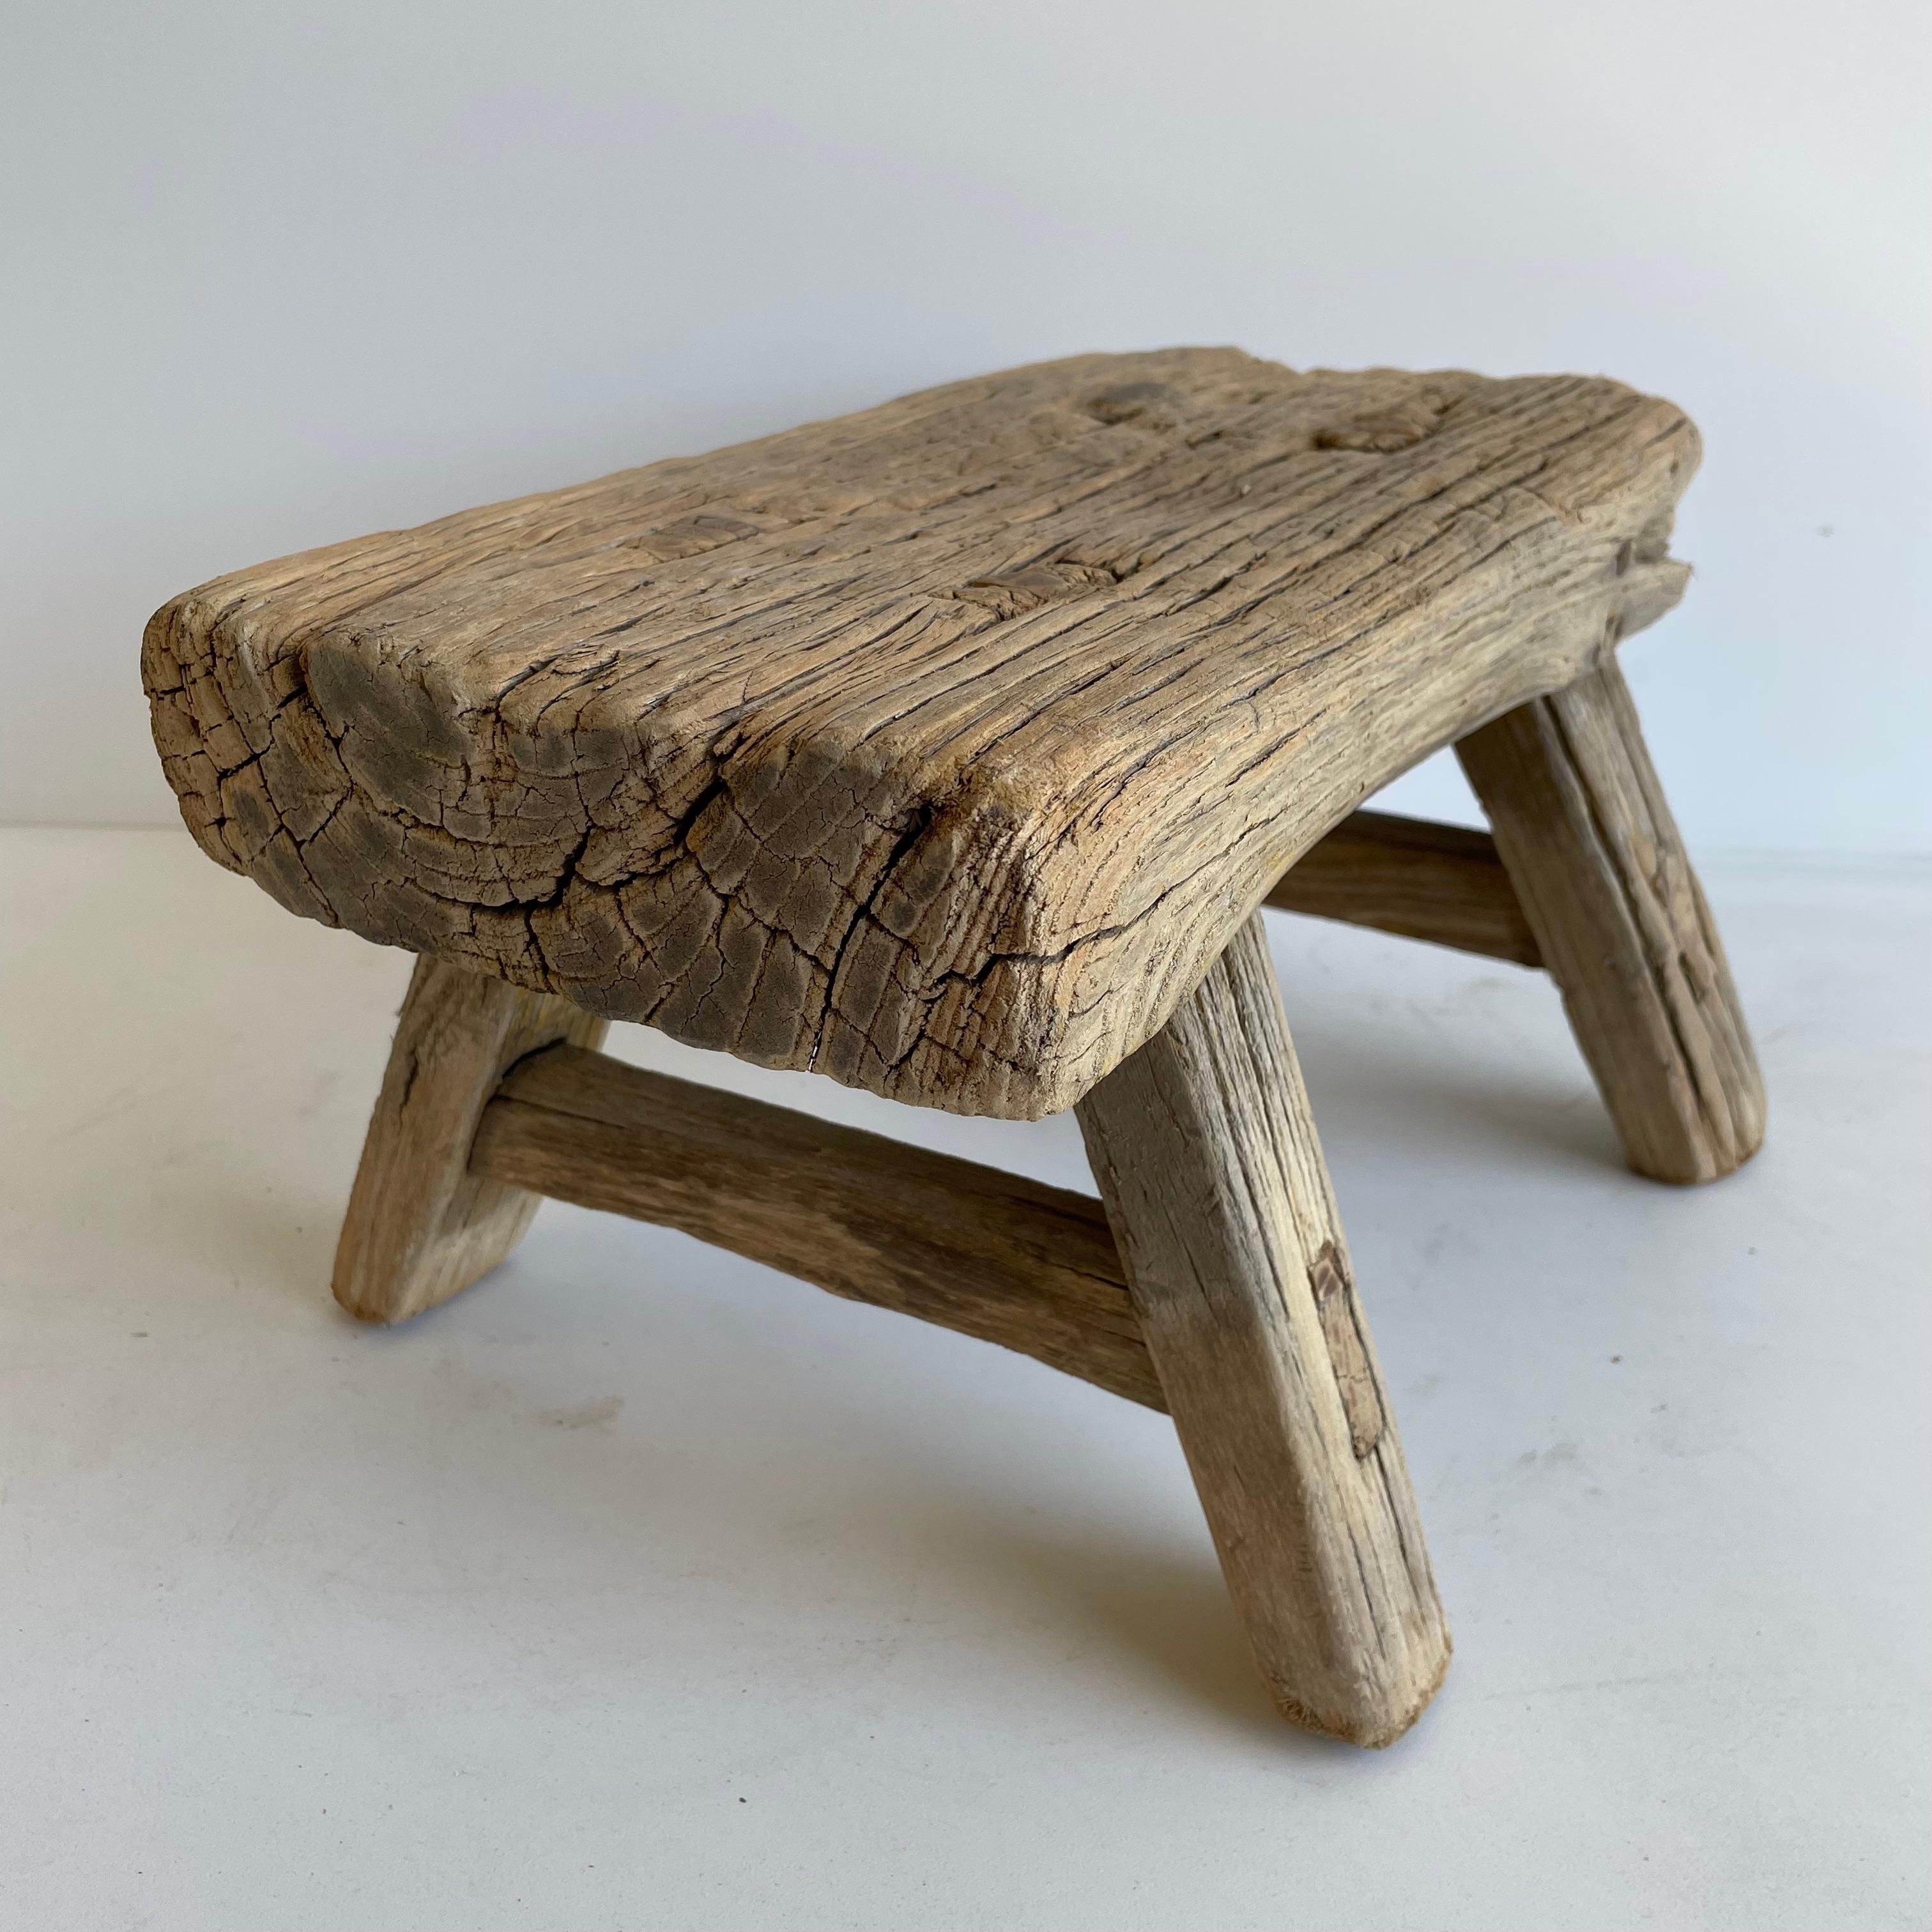 Vintage antique elm wood mini stool
These are the real vintage antique elm wood mini stools! Beautiful antique patina, with weathering and age, these are solid and sturdy ready for daily use, use as a table, stool, drink table, they are great for